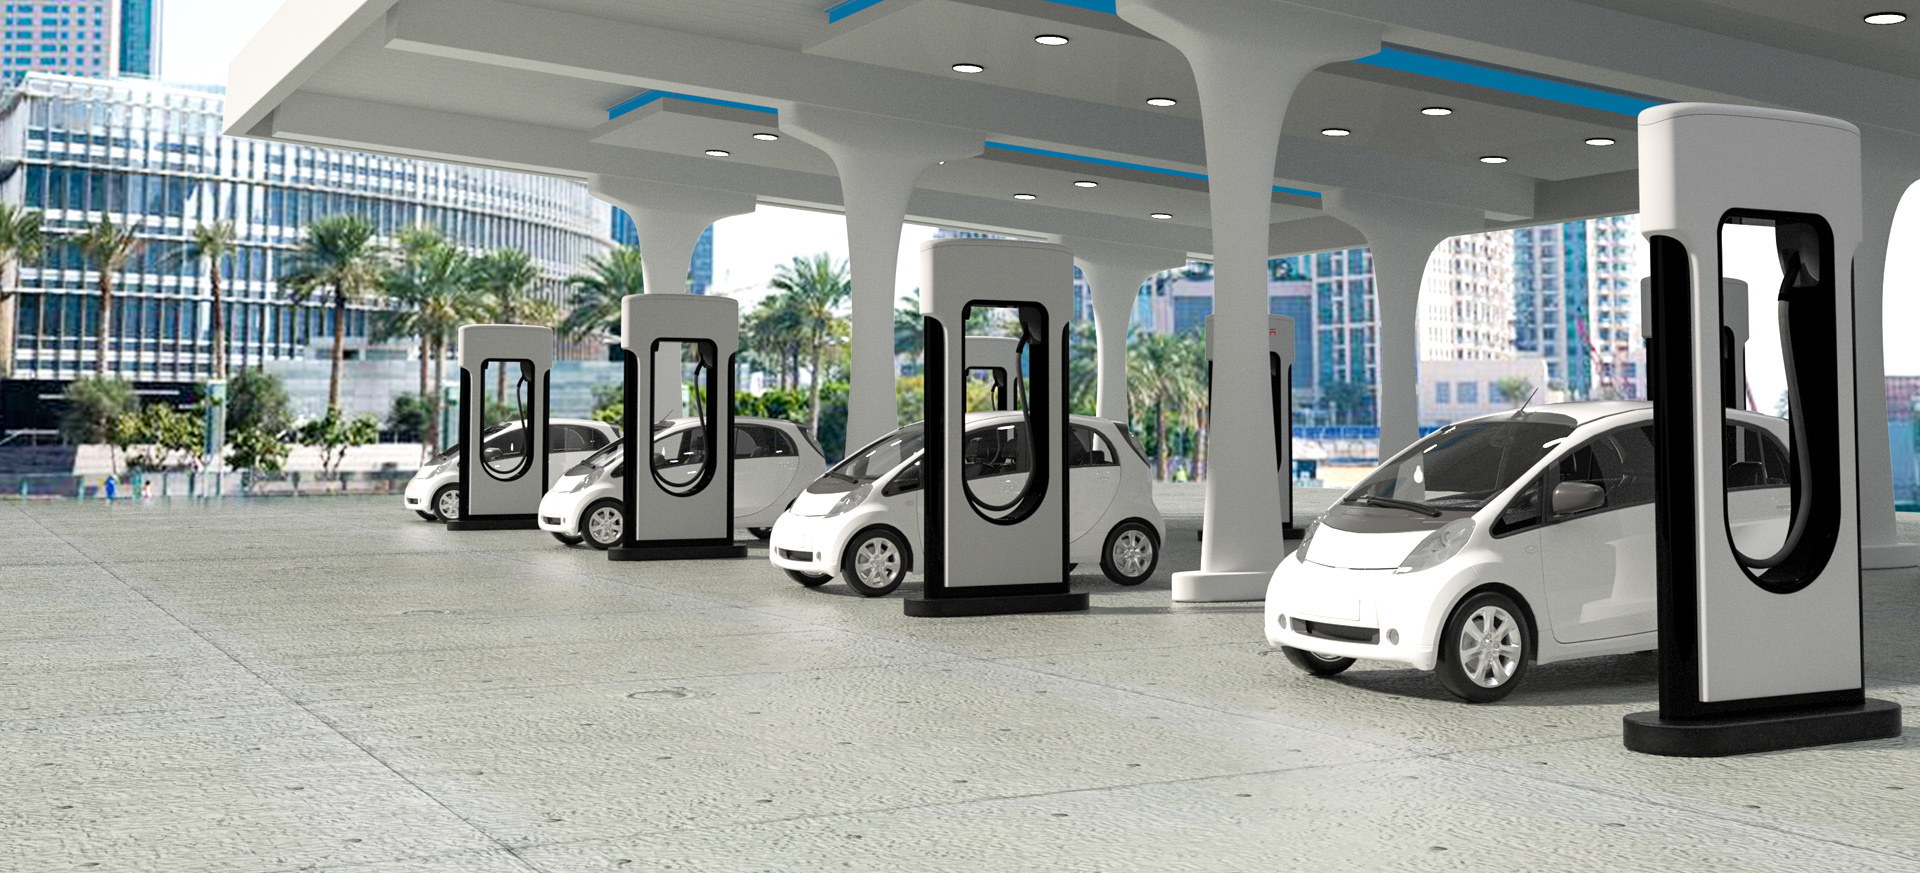 Electric vehicle charging equipment